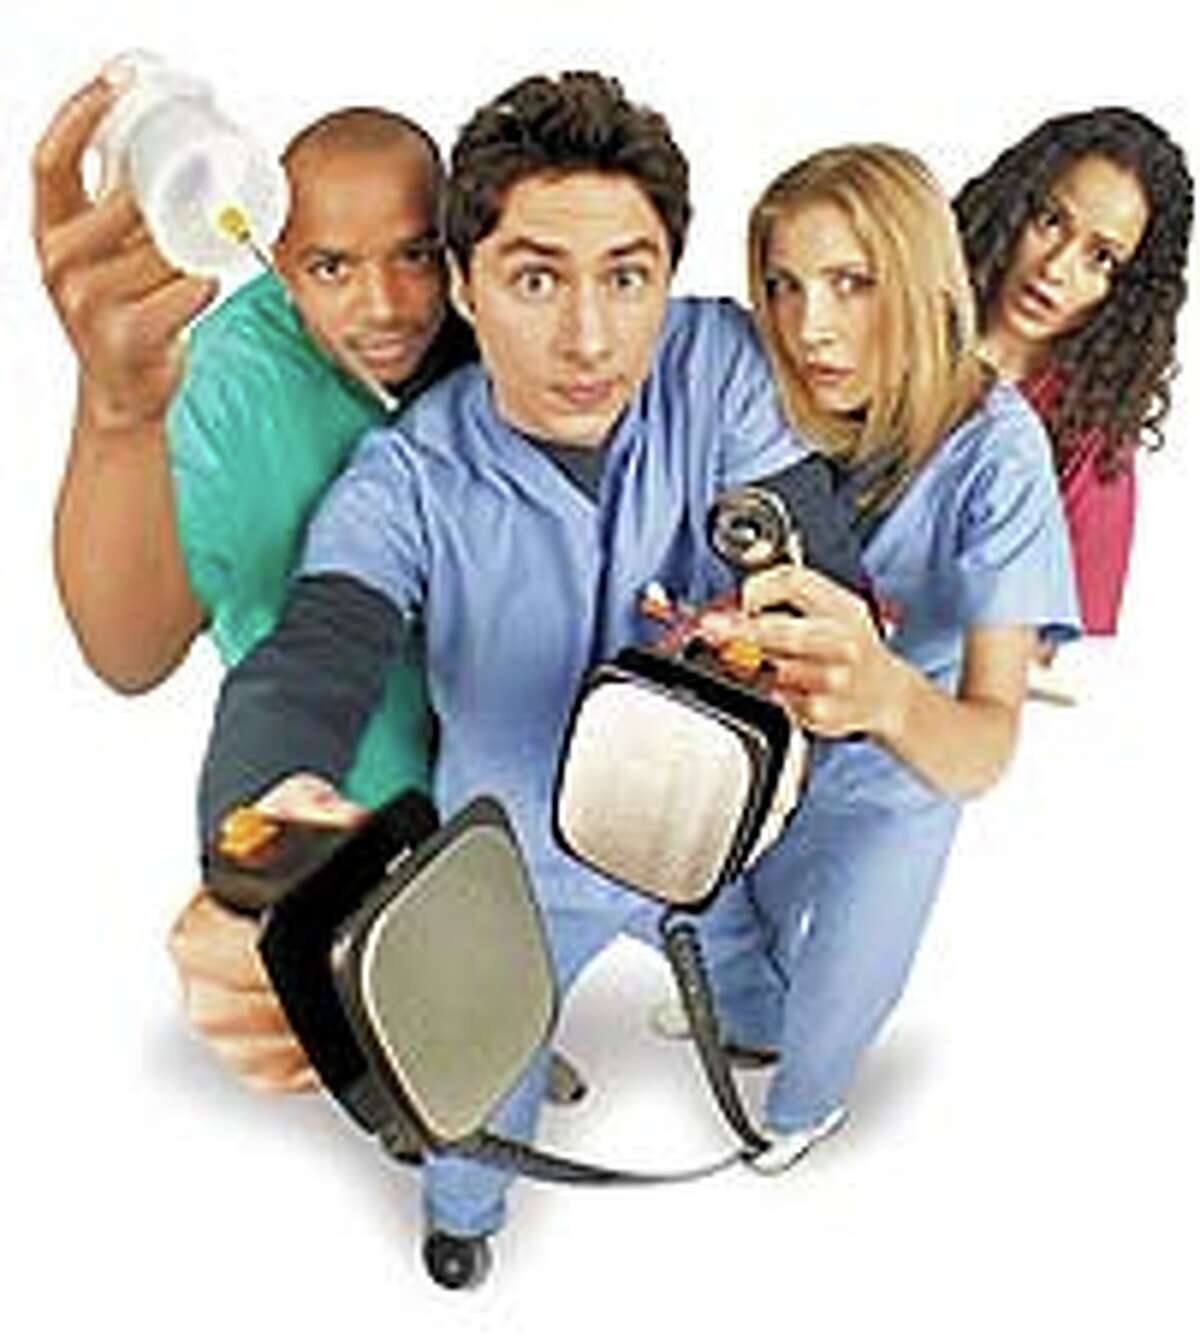 "Scrubs": Freshly minted young doctors get their first taste of real medicine in this big-city hospital show with healthy doses of impertinence. It stars, from left, Donald Faison, Zach Braff, Sarah Calke and Judy Reyes.